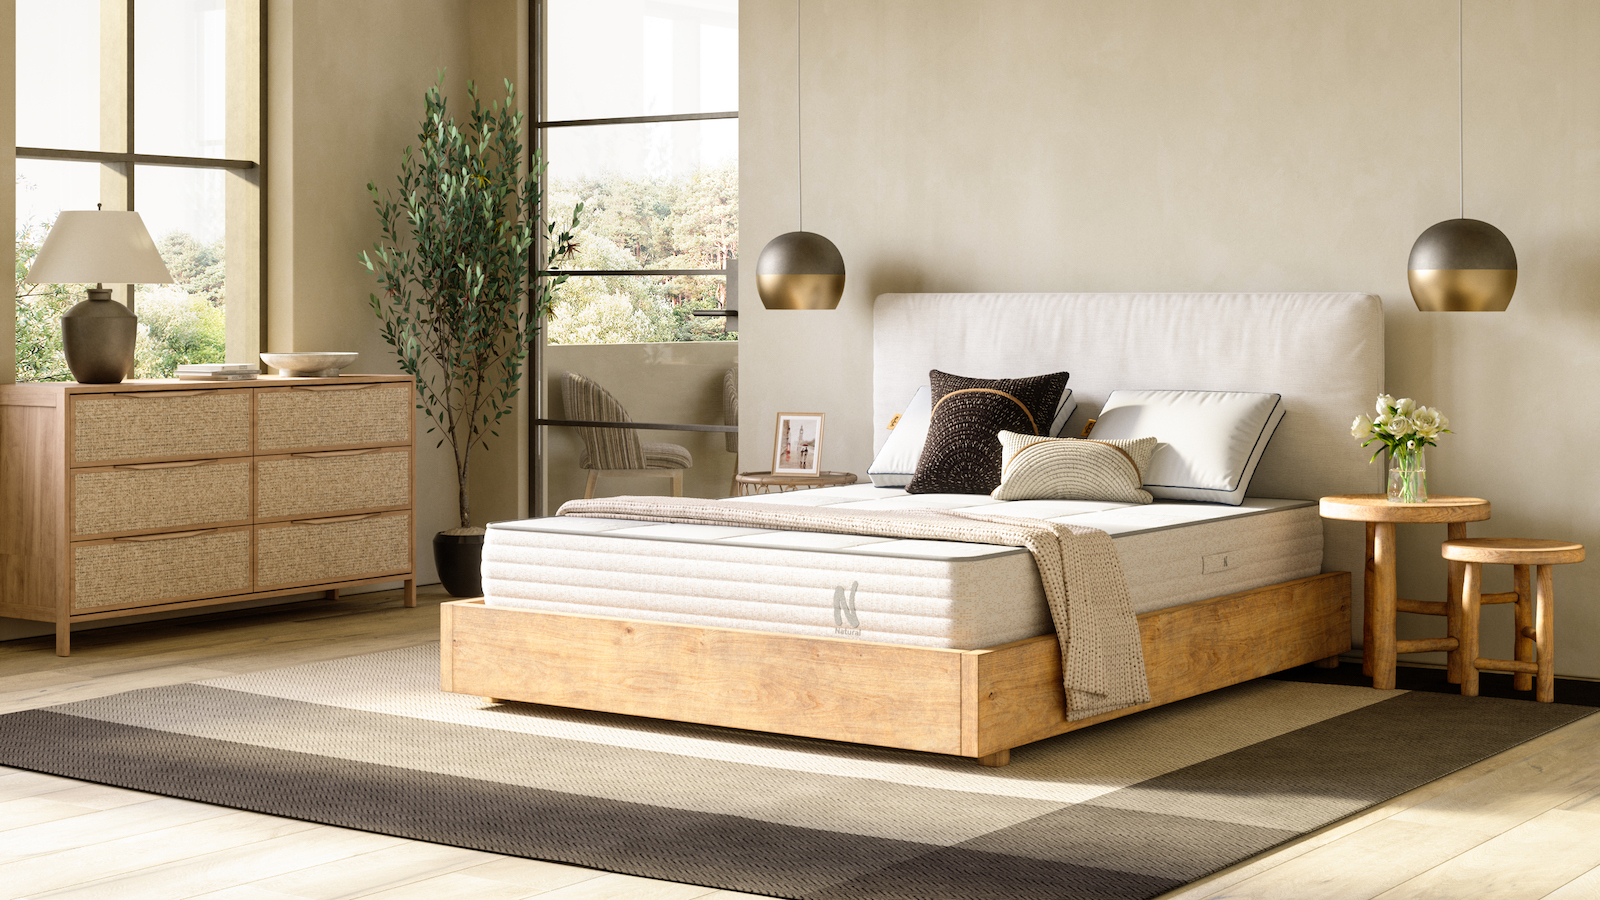 Nolah's National Sleep Week promotions mean it's a great time for a new mattress